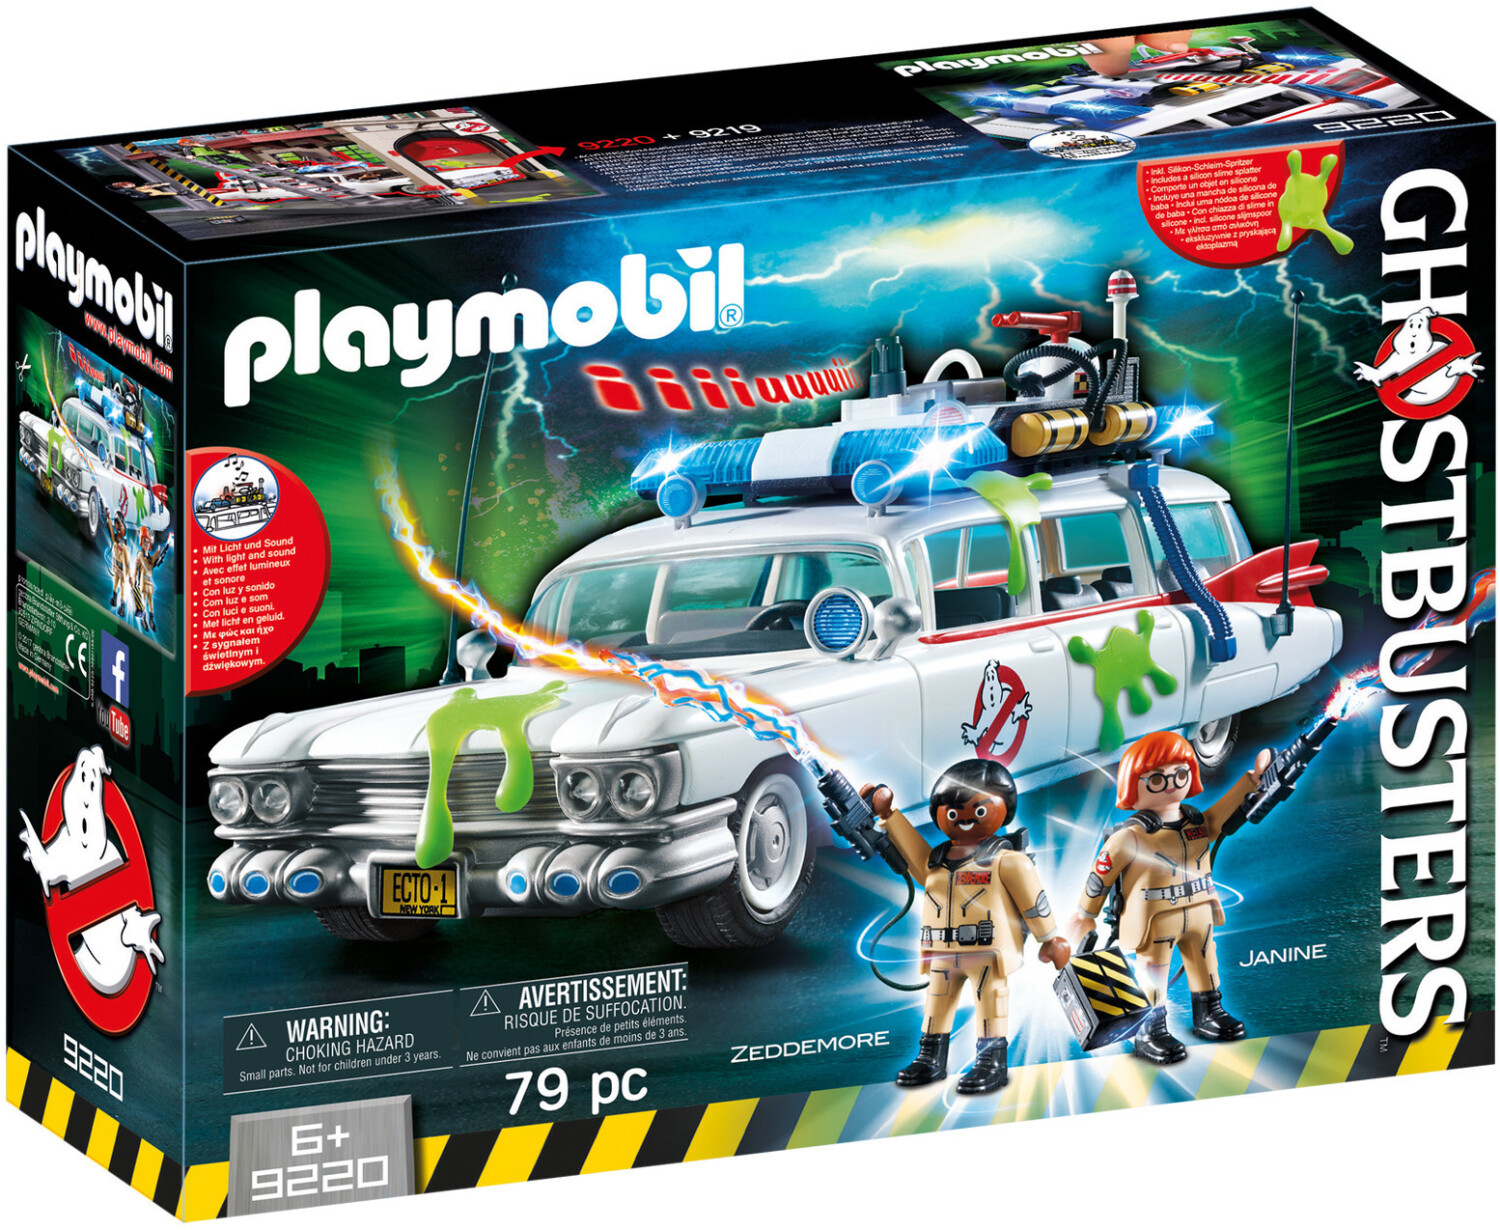 Buy Playmobil Ghostbusters - Ecto-1 (9920) from £33.75 (Today) – Best Deals  on